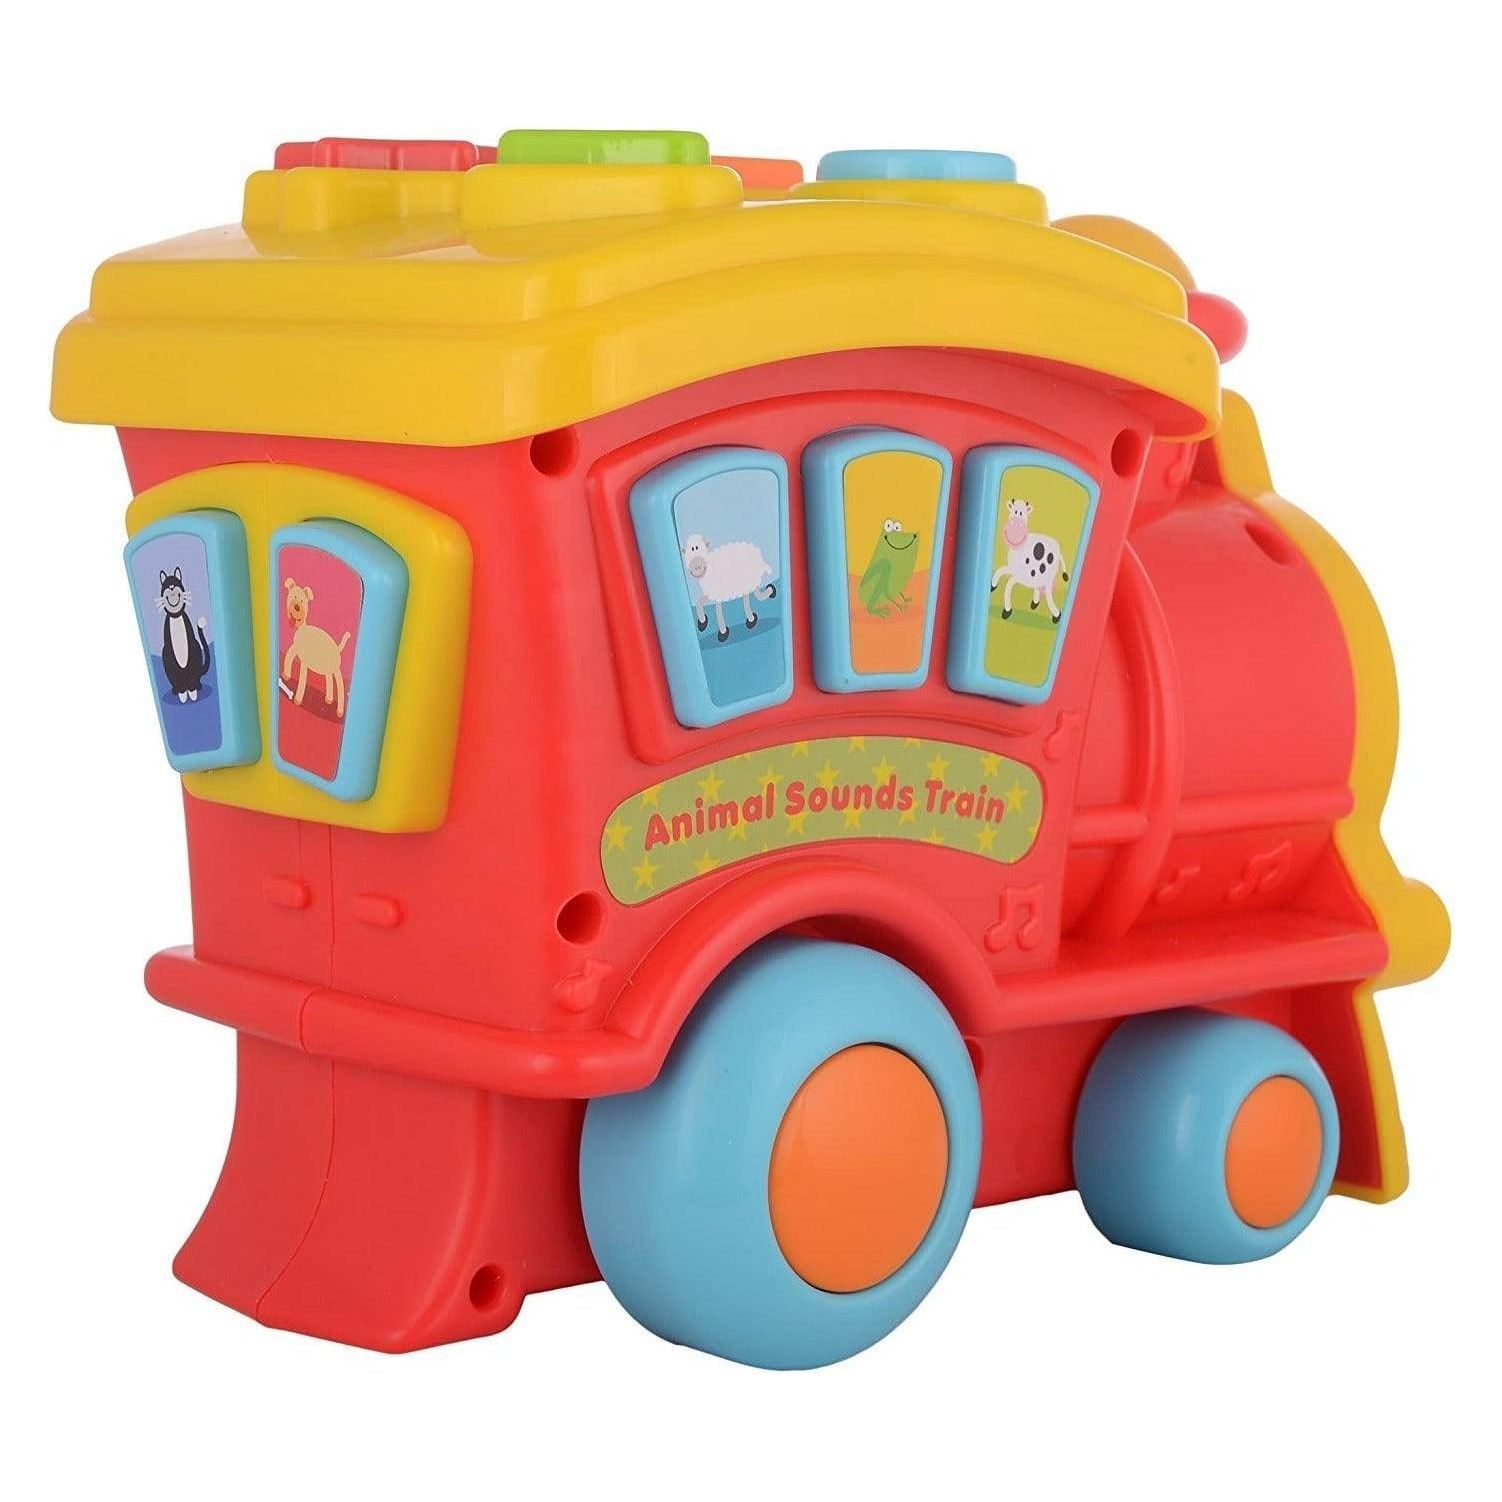 WinFun Animal Sounds Train - BumbleToys - 2-4 Years, Cecil, Nursery Toys, Unisex